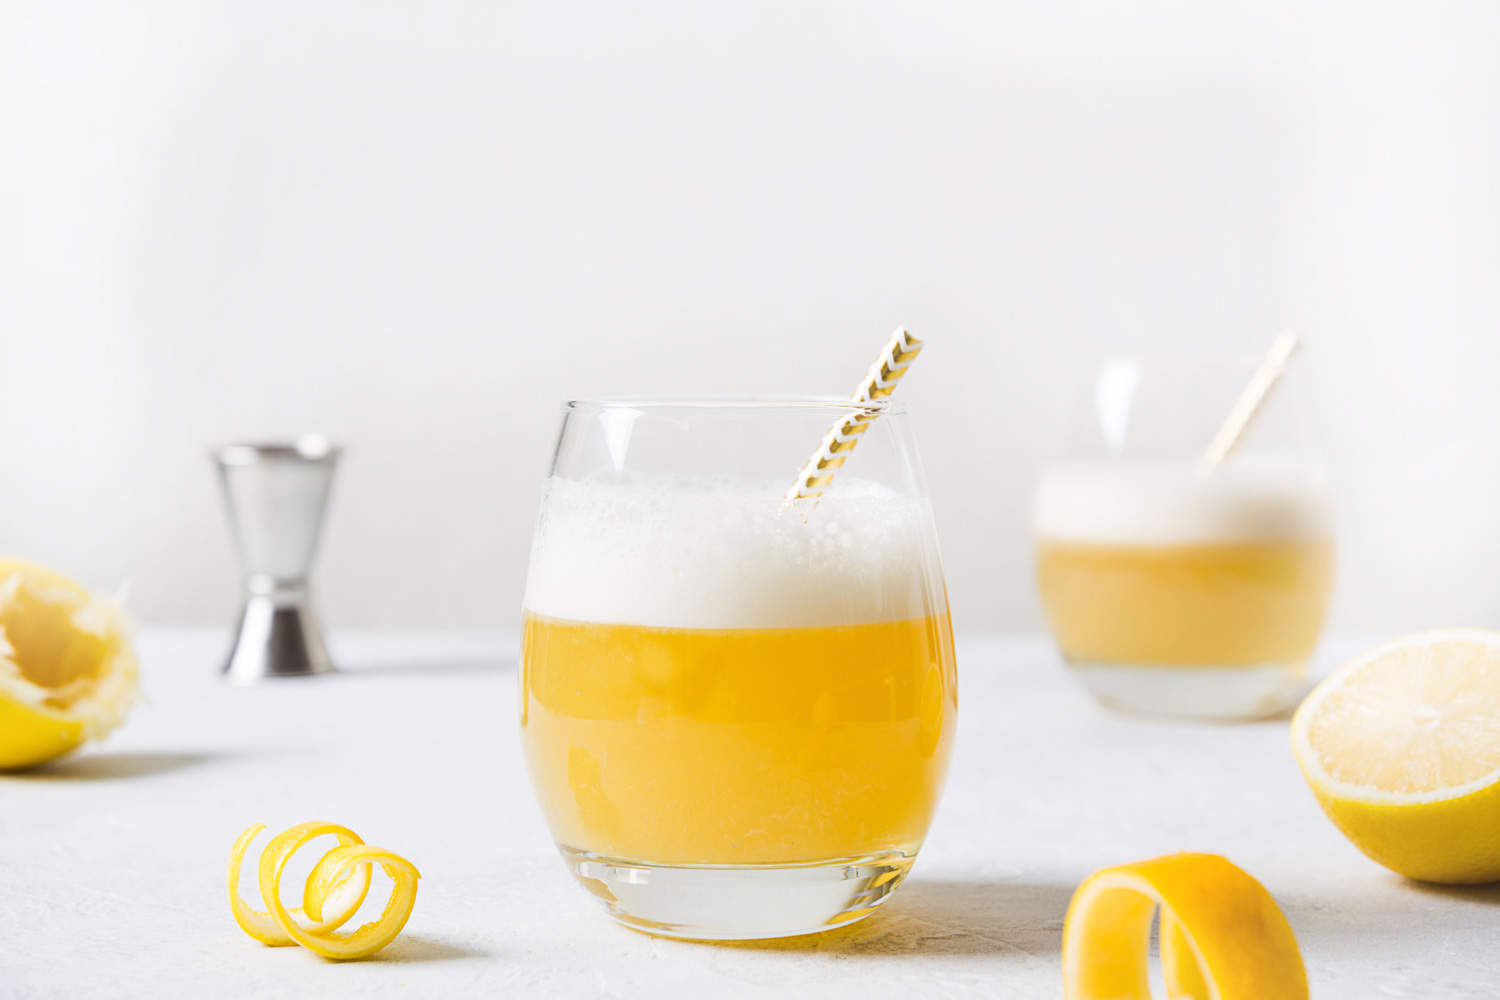 Boston sour cocktail - bourbon with lemon juice, sugar syrup and egg white in glass. Vertical orientation.